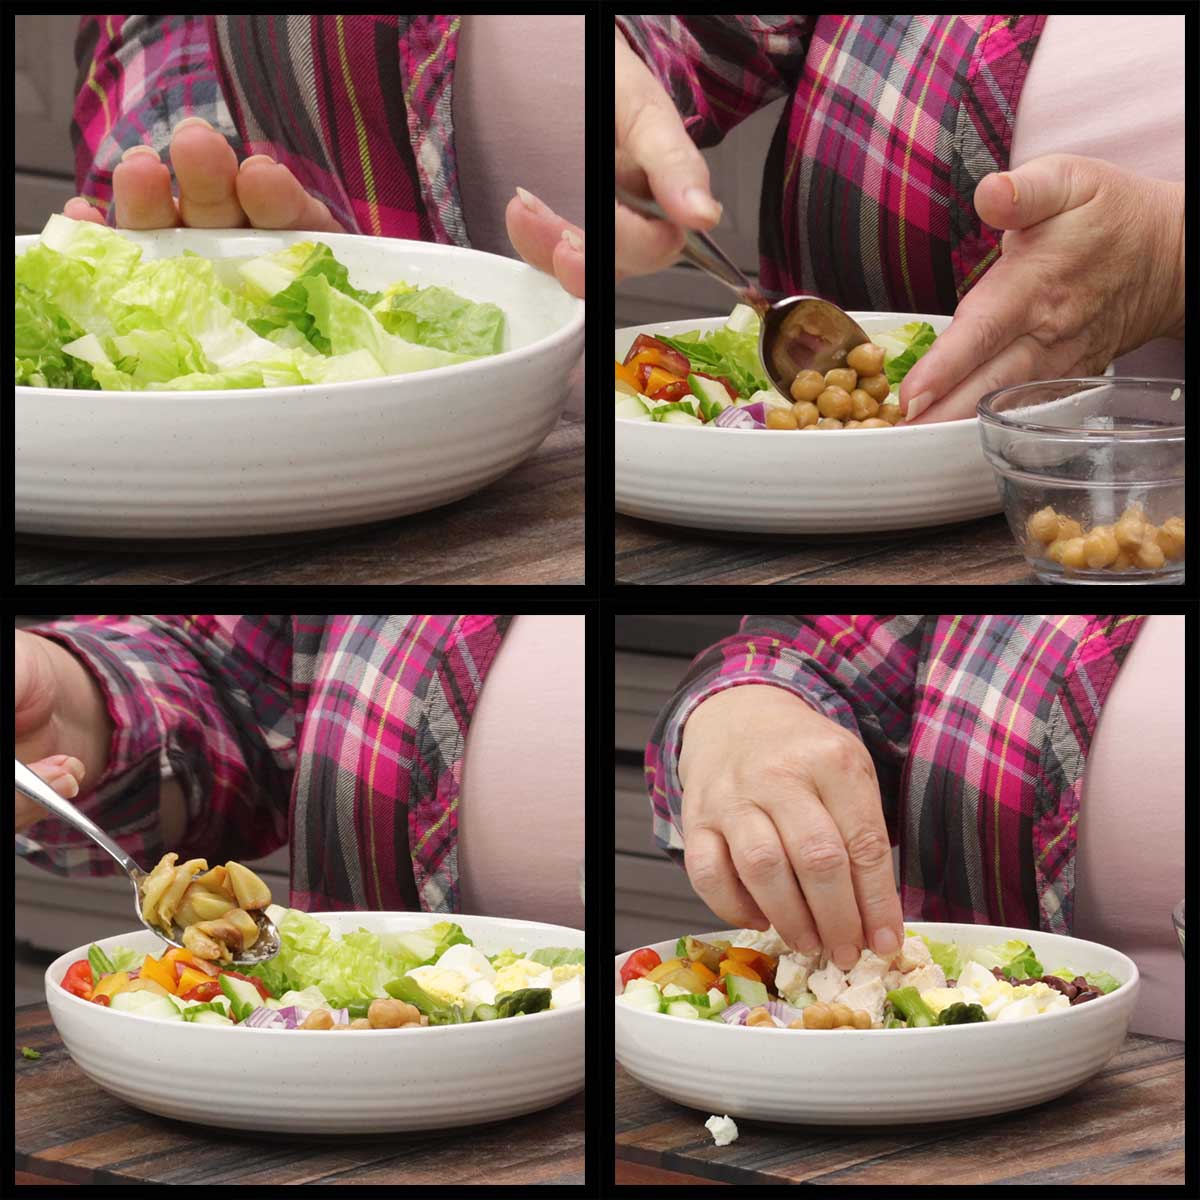 assembling the chopped salad in a bowl.